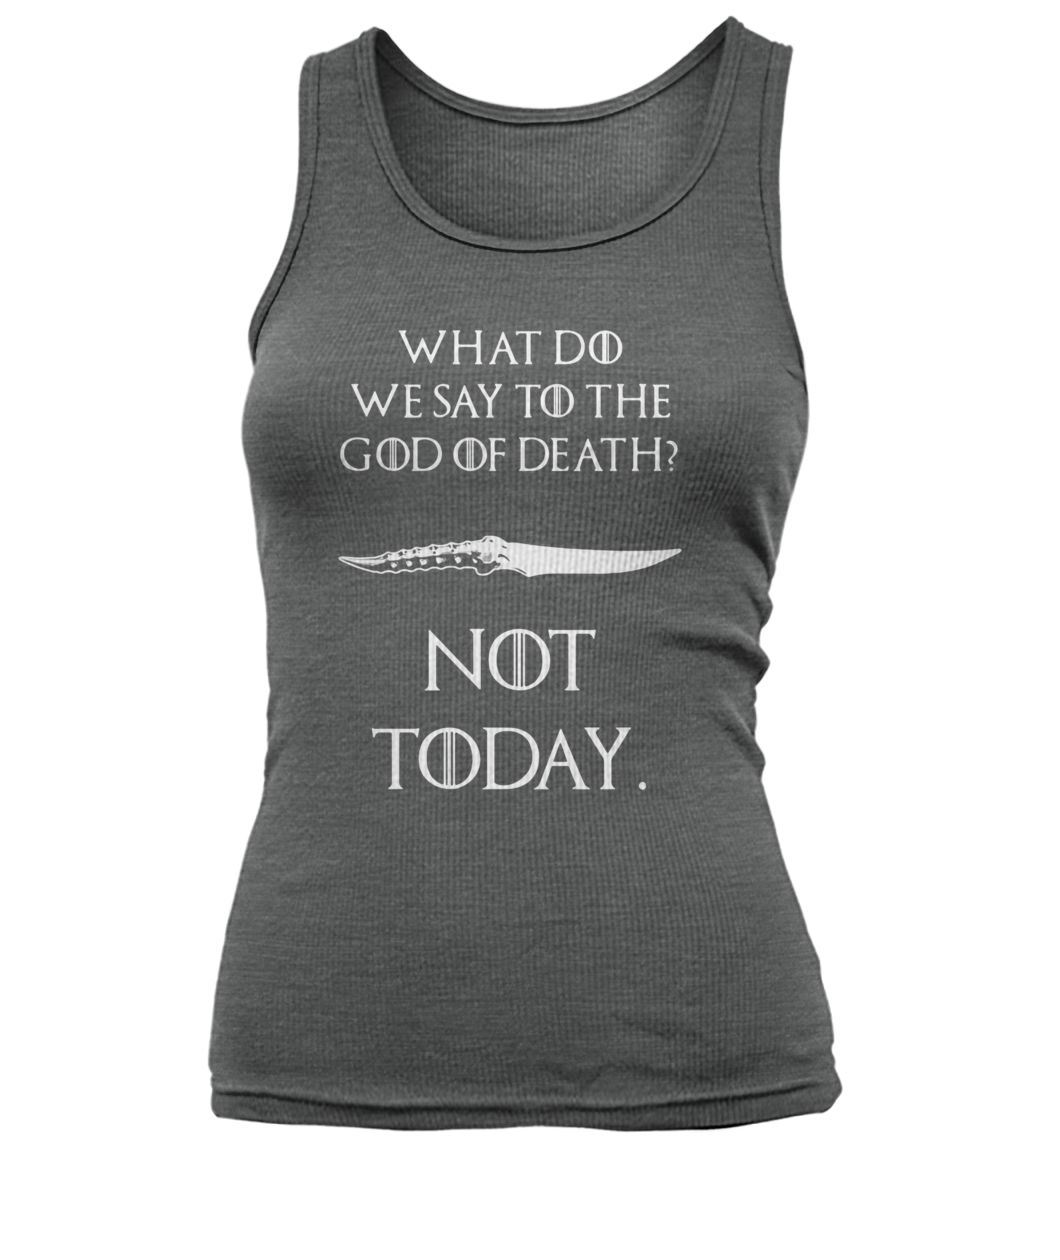 Game of thrones what do we say to the God of death not today women's tank top